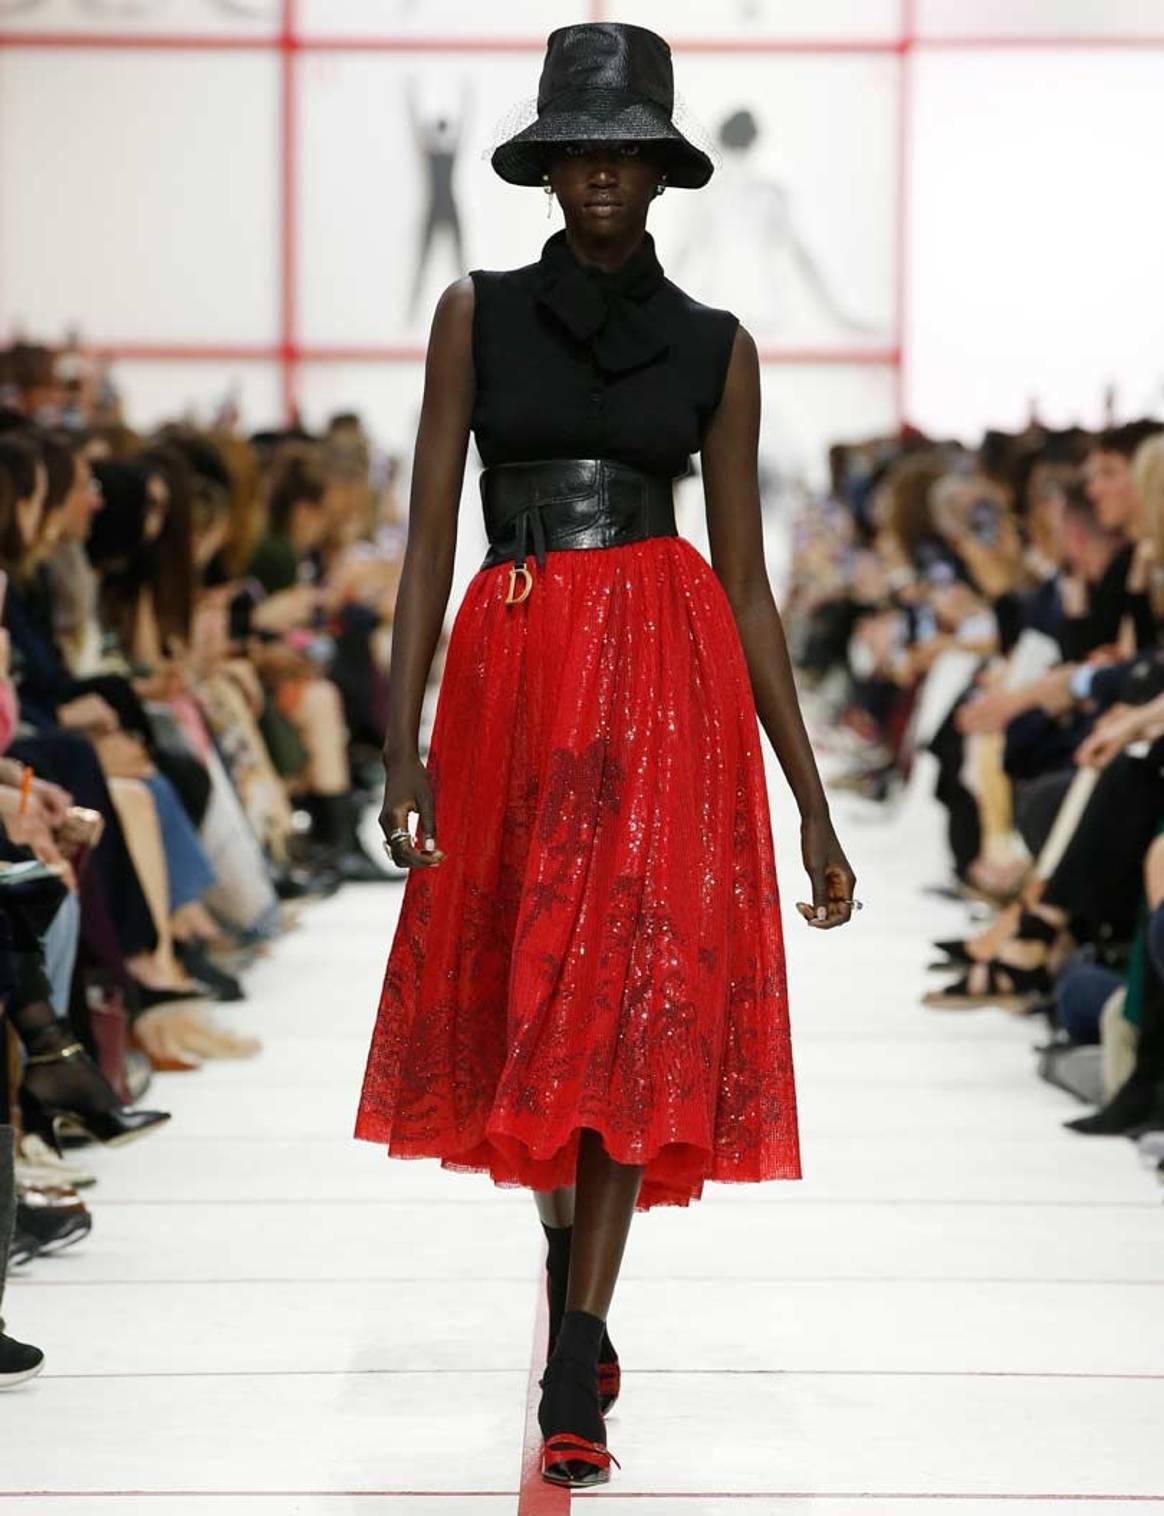 Tartan, hats and nipped waists: the big trends from Paris fashion week